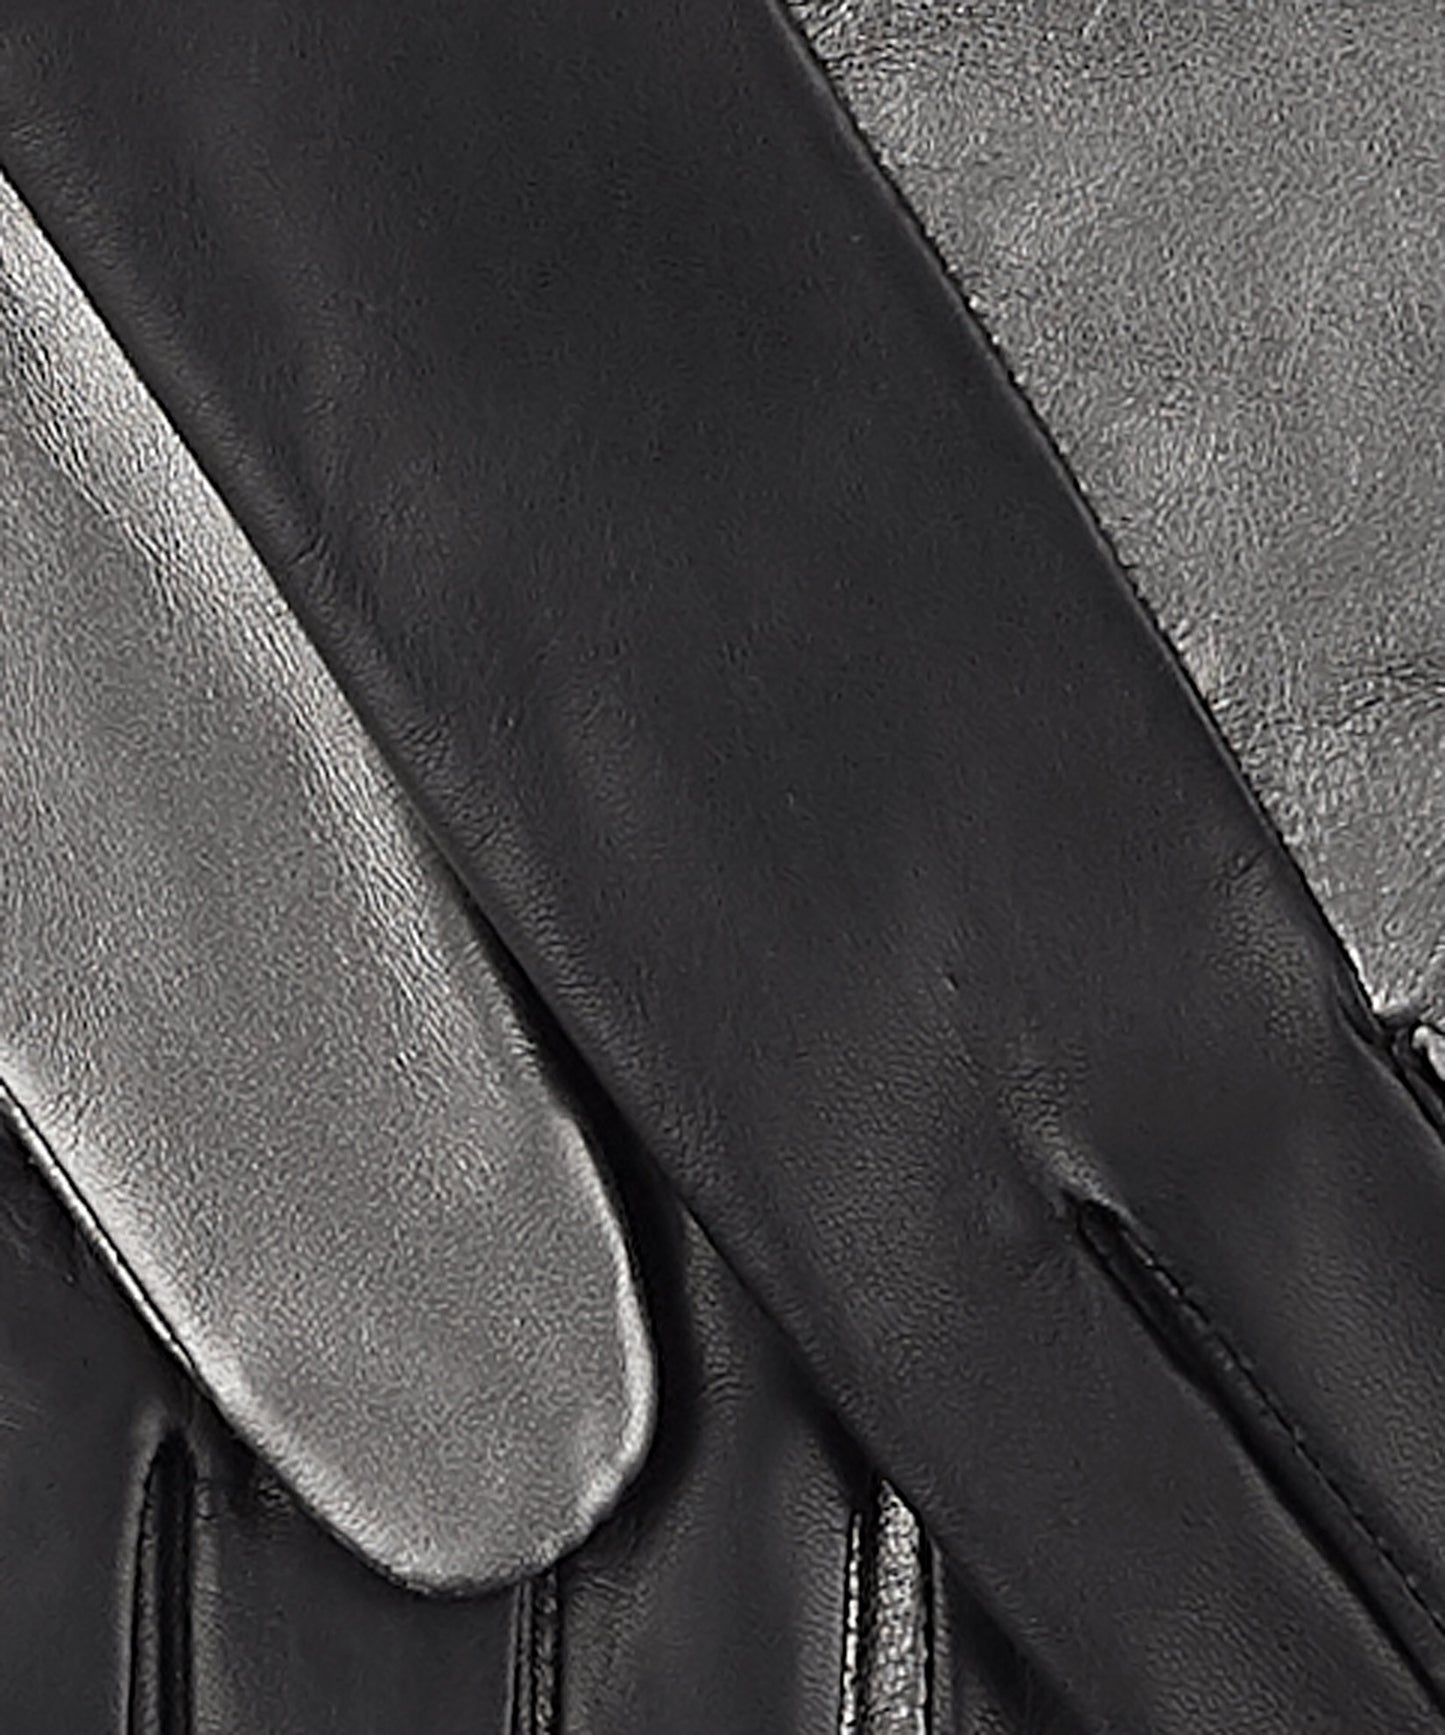 Leather Colorblock Glove in color Black